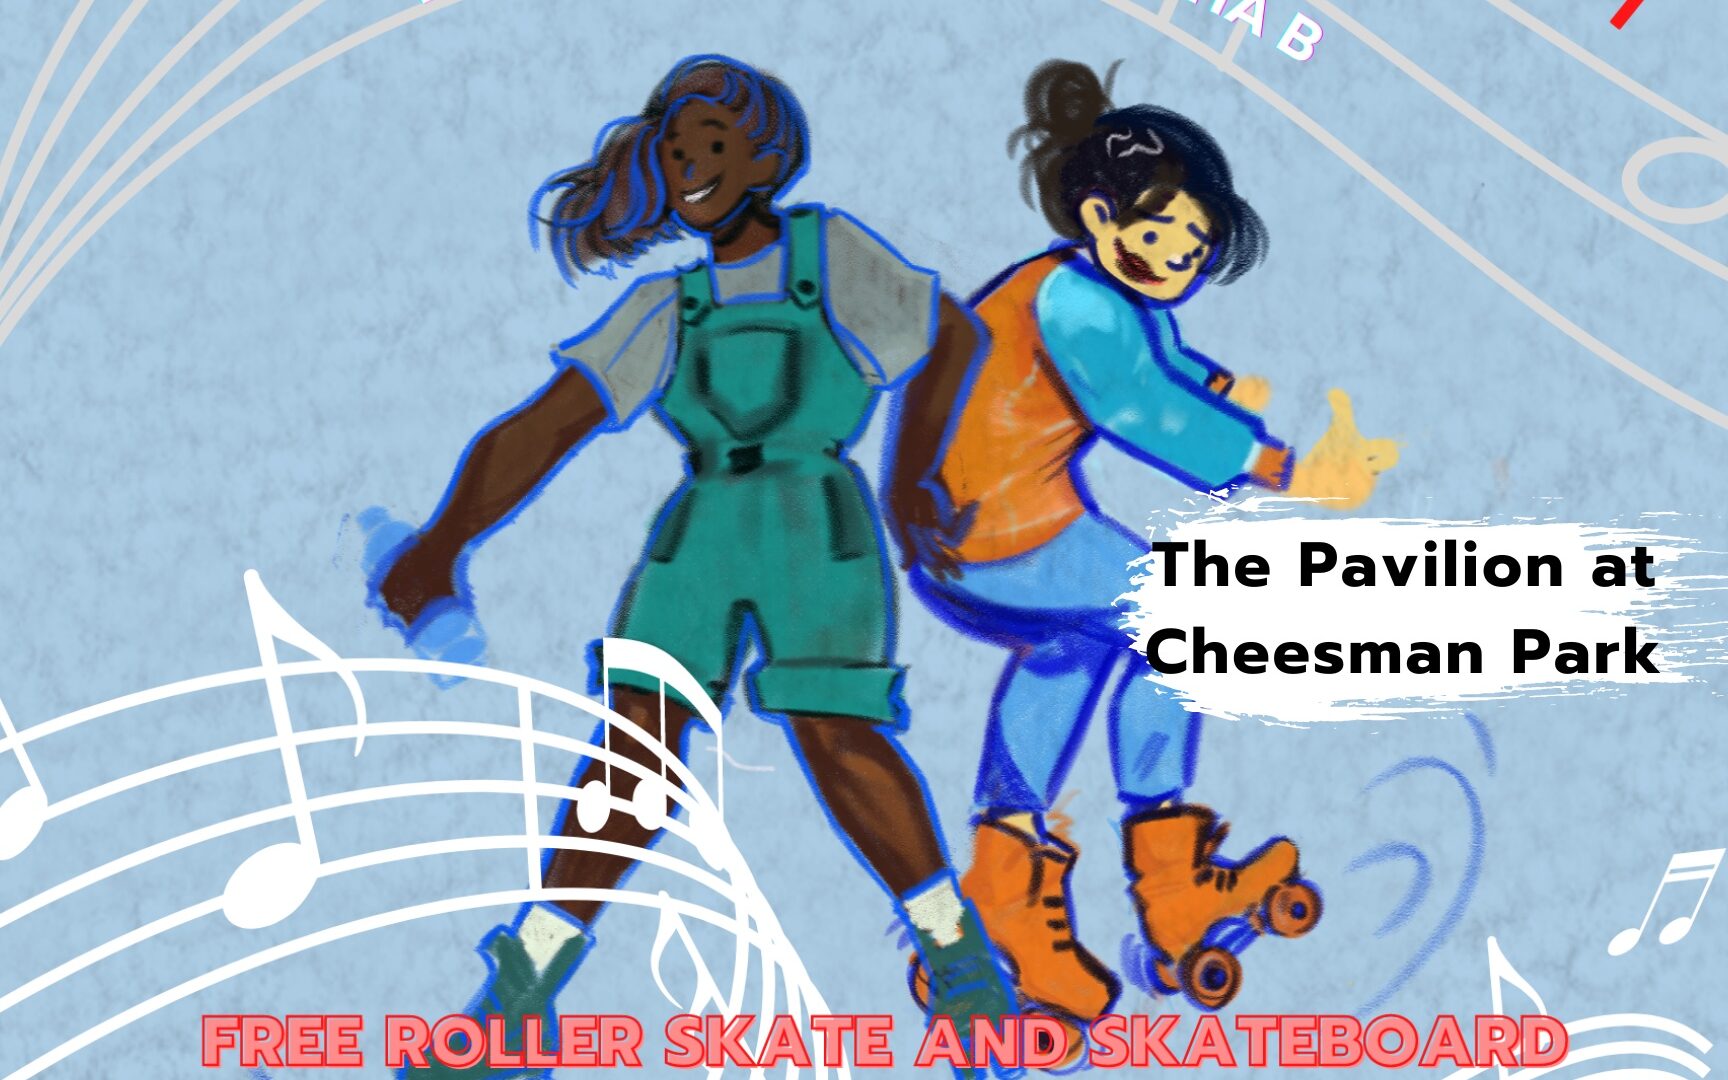 Two rollerbladers with the text "The Wheel Deal! Sunday July 10 - 11AM to 2PM. The Pavillon at Cheesman Park"